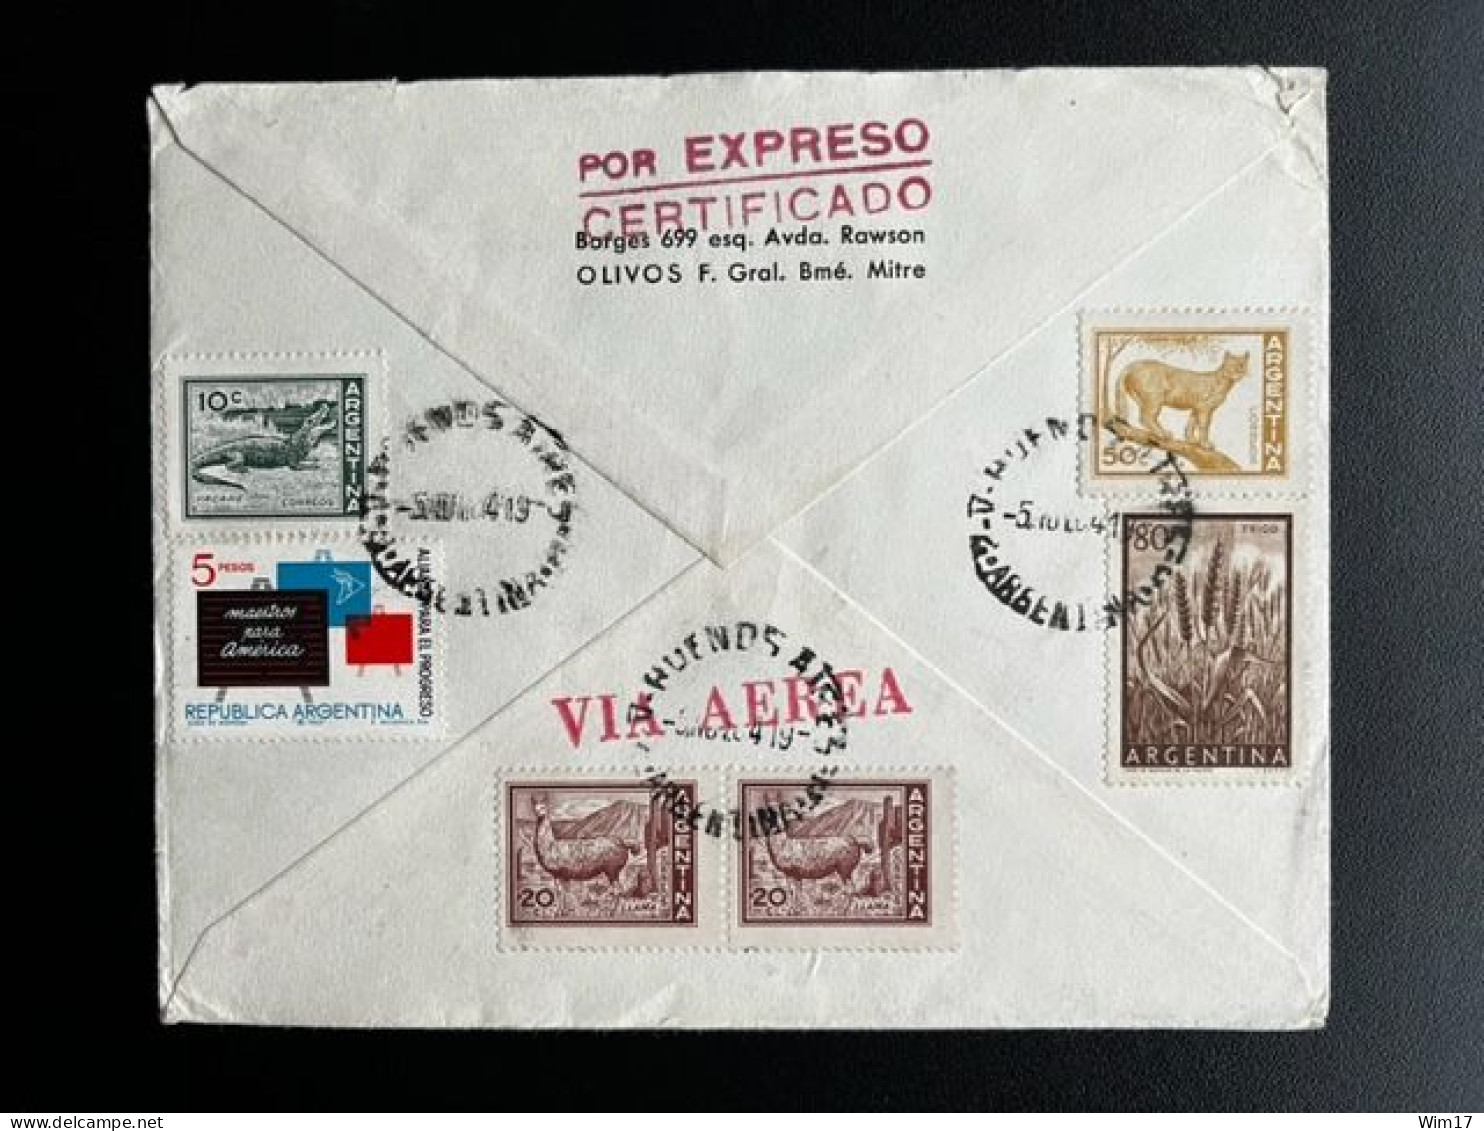 ARGENTINA 1964 REGISTERED EXPRESS AIR MAIL LETTER BUENOS AIRES TO WINTERMOOR 05-11-1964 CERTIFICADO EXPRESO - Storia Postale